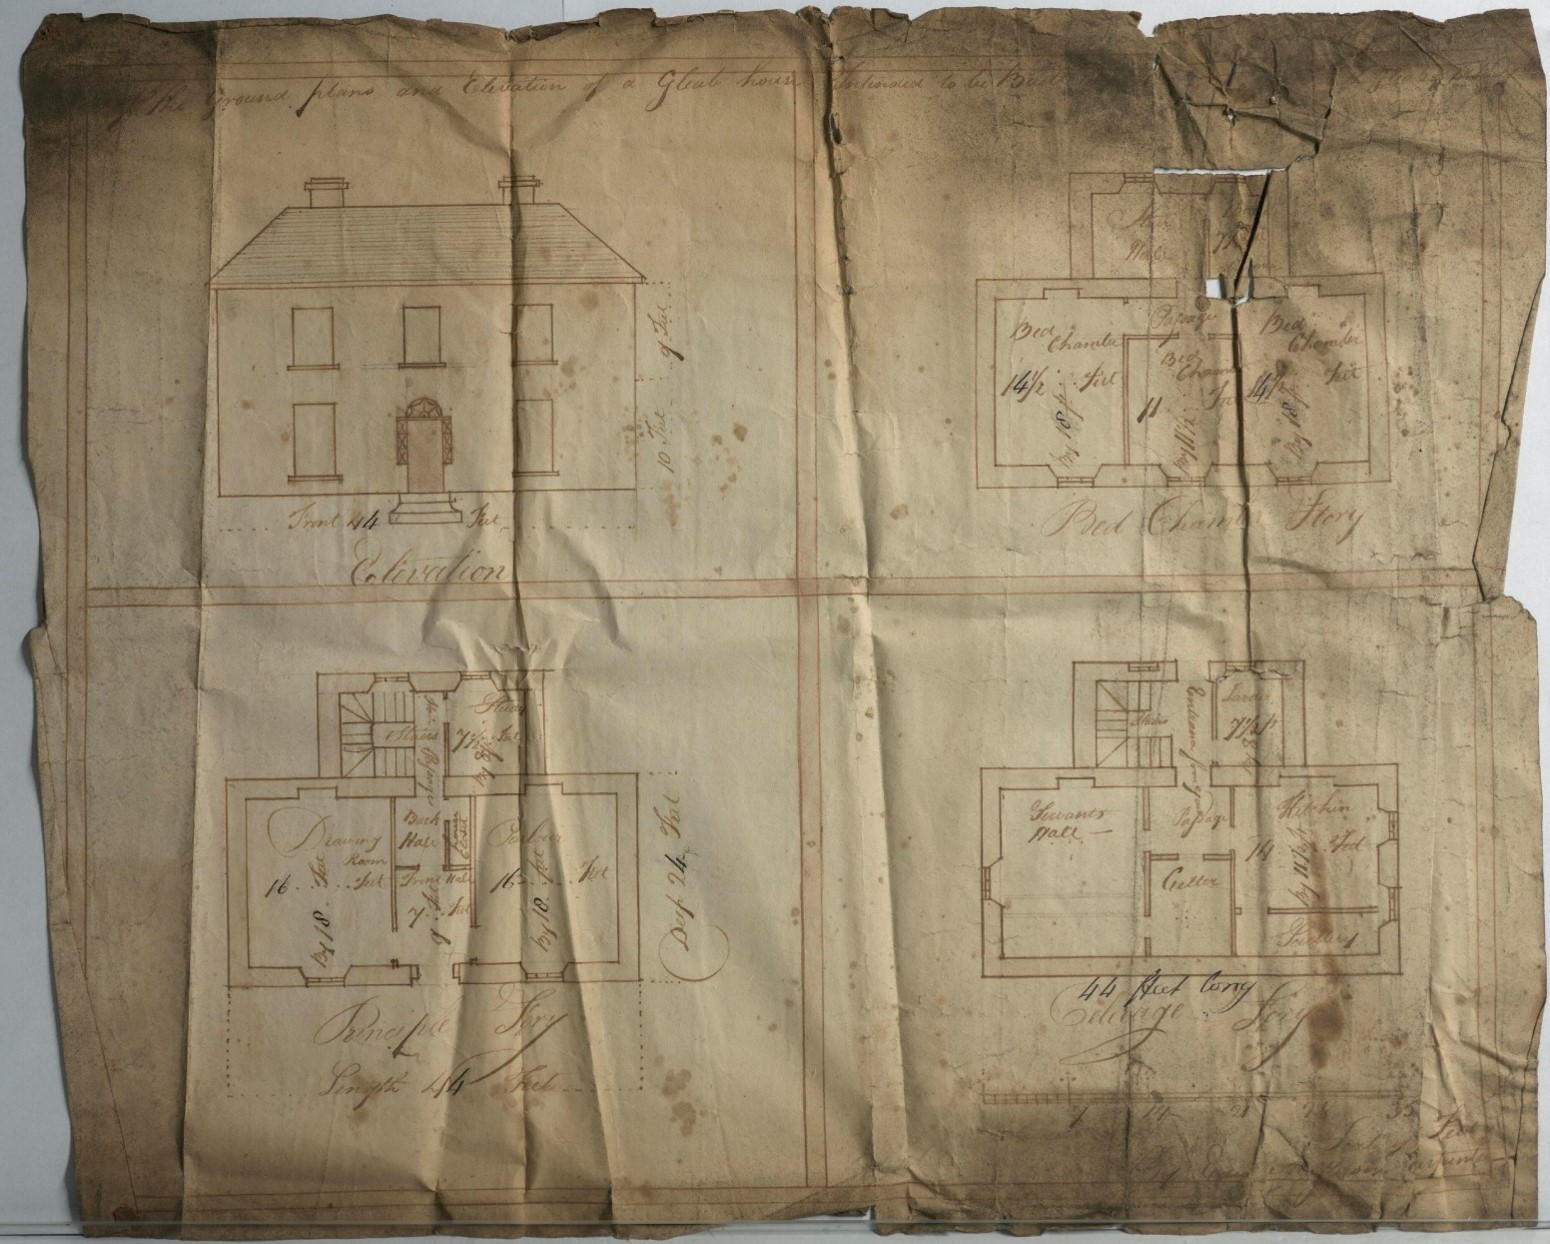 Edward Masterson, “Ground Plan and Elevation of a Glebe House intended to be built on the Glebe of Athy. April 1807 Edward Masterson Carpenter. Approved Charles Dublin,” RCB Library - Architectural Drawings, accessed April 4, 2023, https://archdrawing.ireland.anglican.org/items/show/9805.